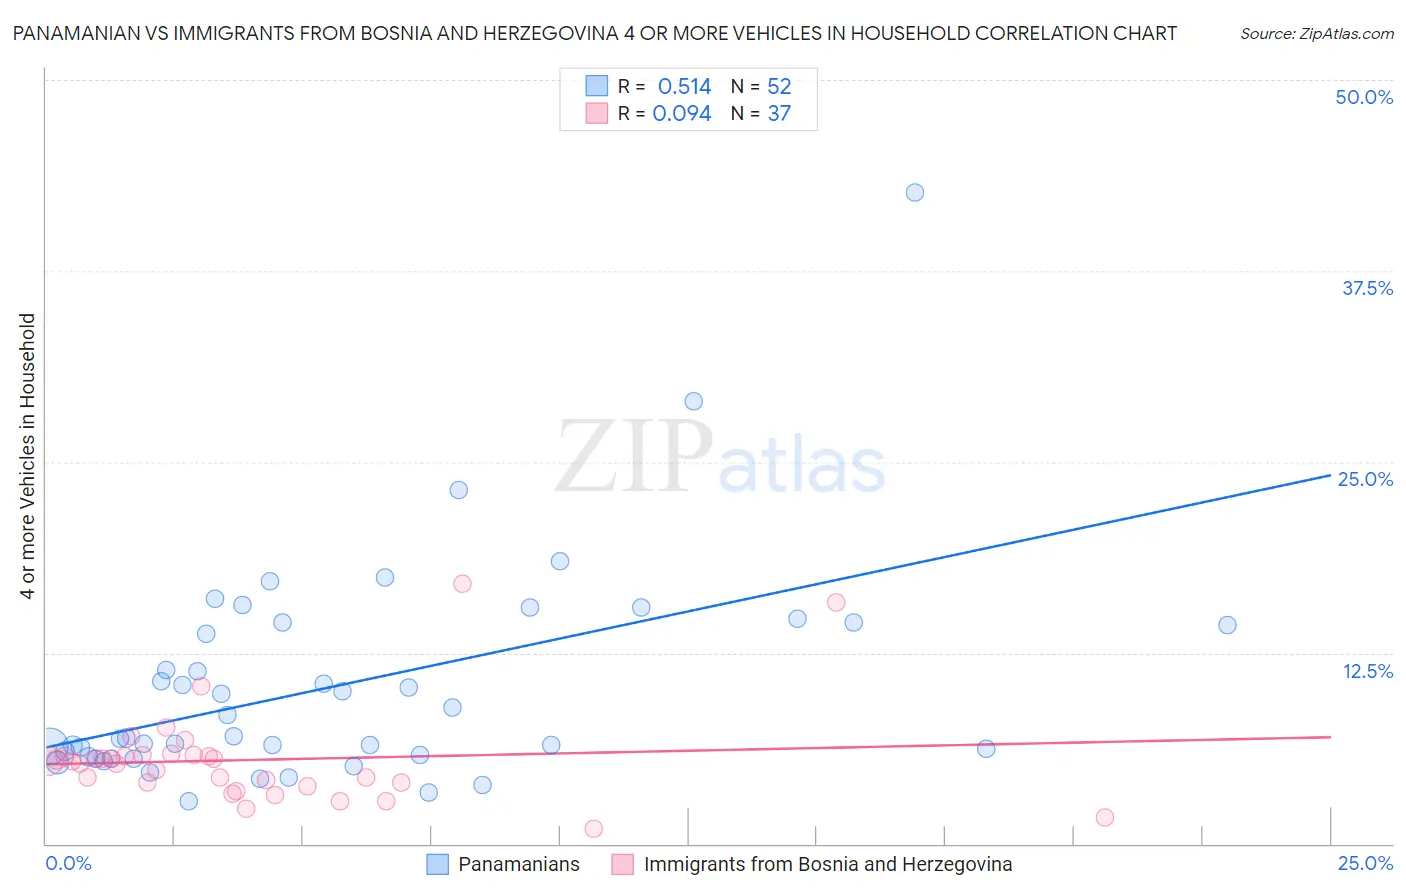 Panamanian vs Immigrants from Bosnia and Herzegovina 4 or more Vehicles in Household